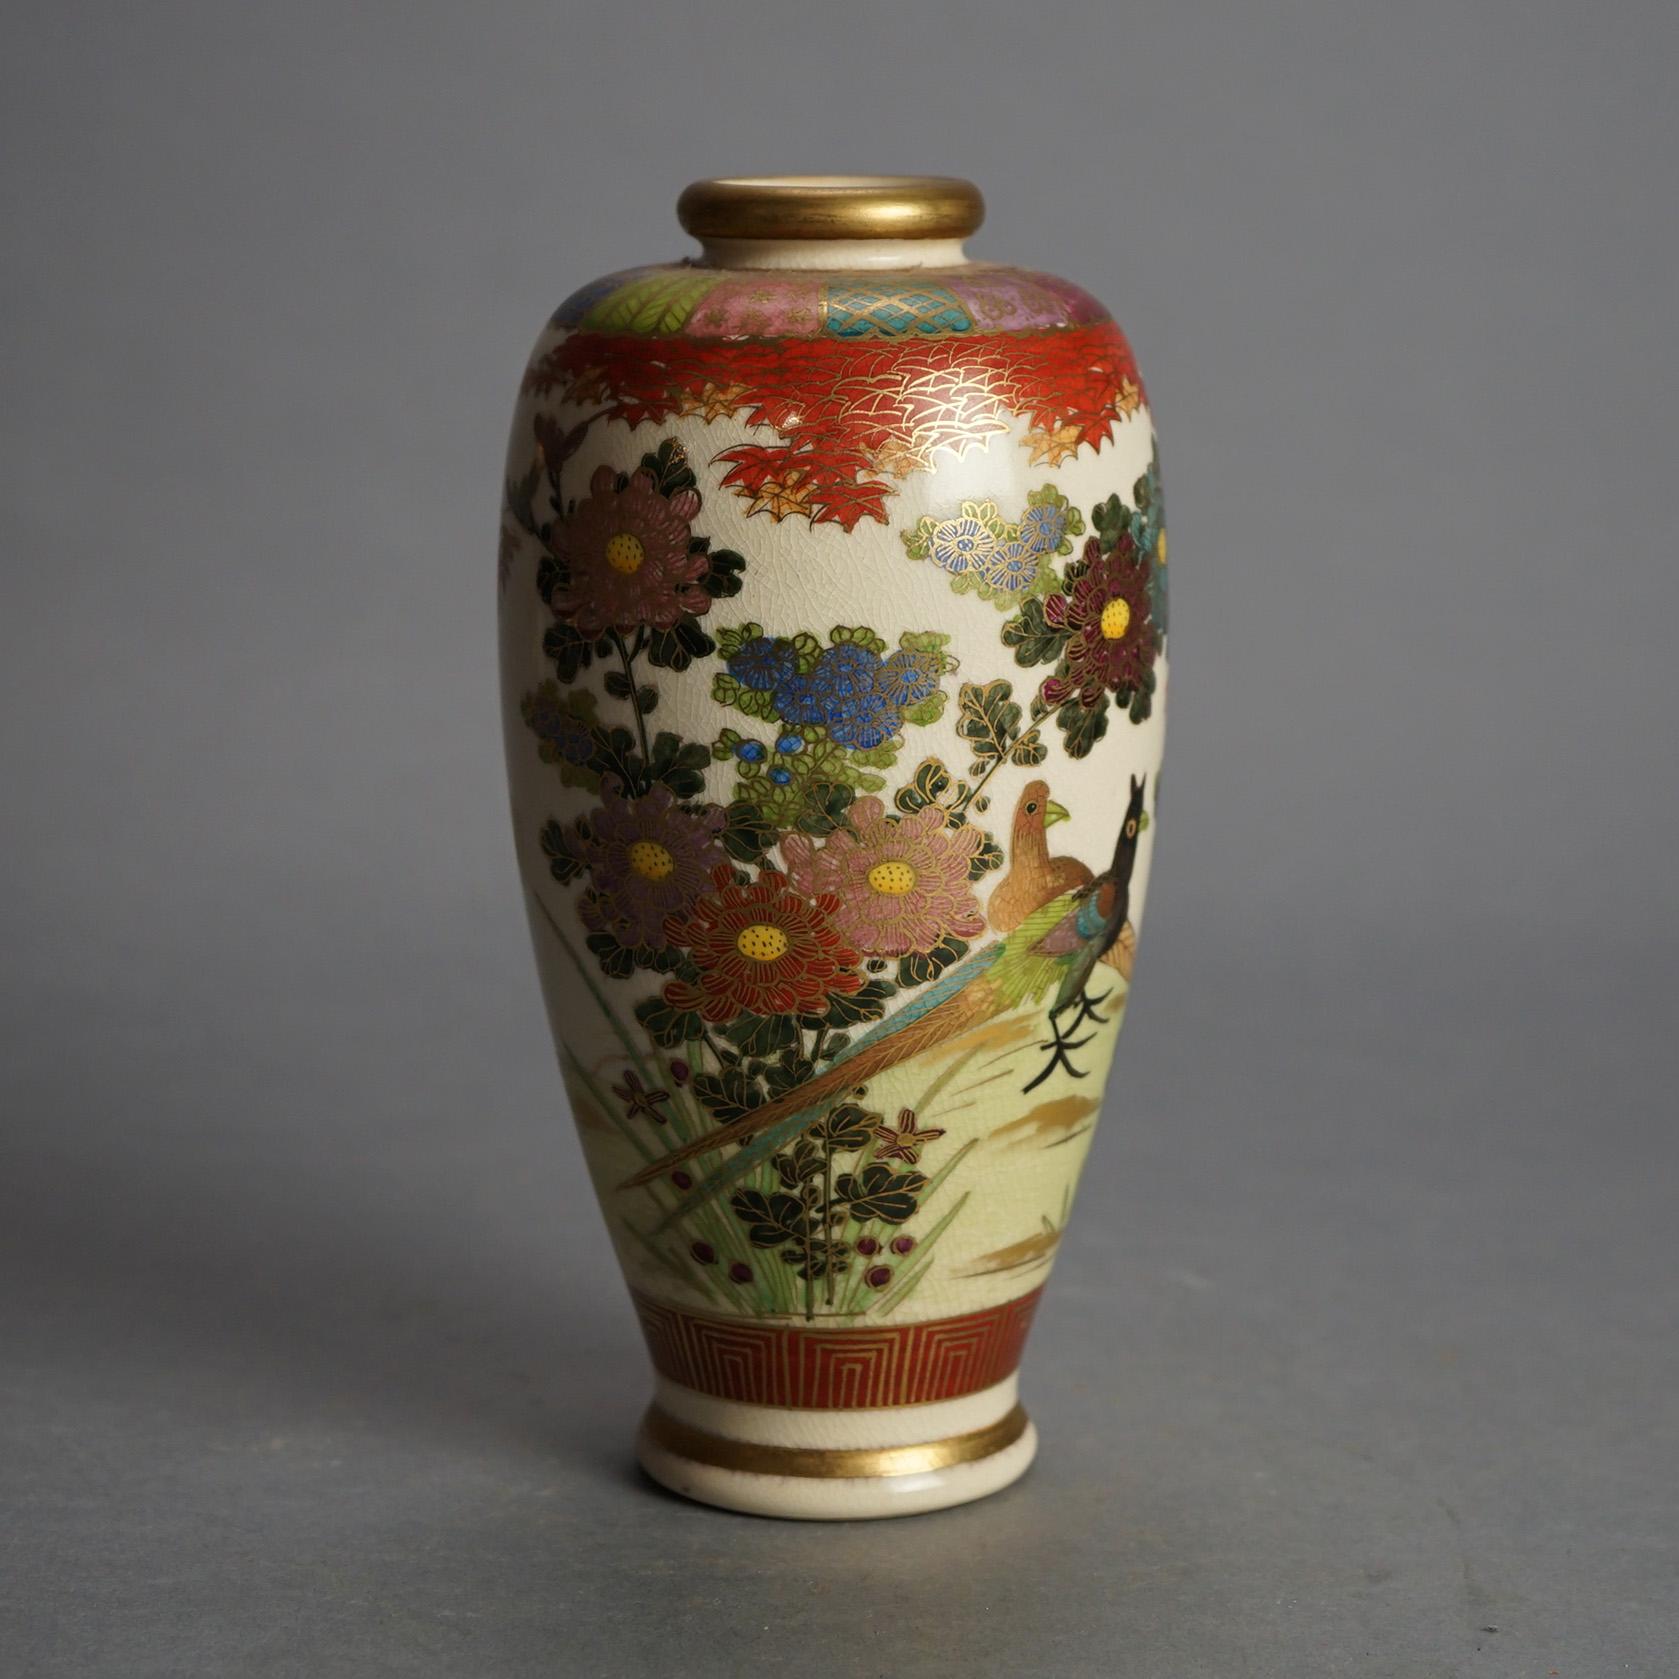 Antique Japanese Satsuma Hand Painted & Gilt Pottery Vase with Garden Flowers & Birds C1920

Measures - 8.75